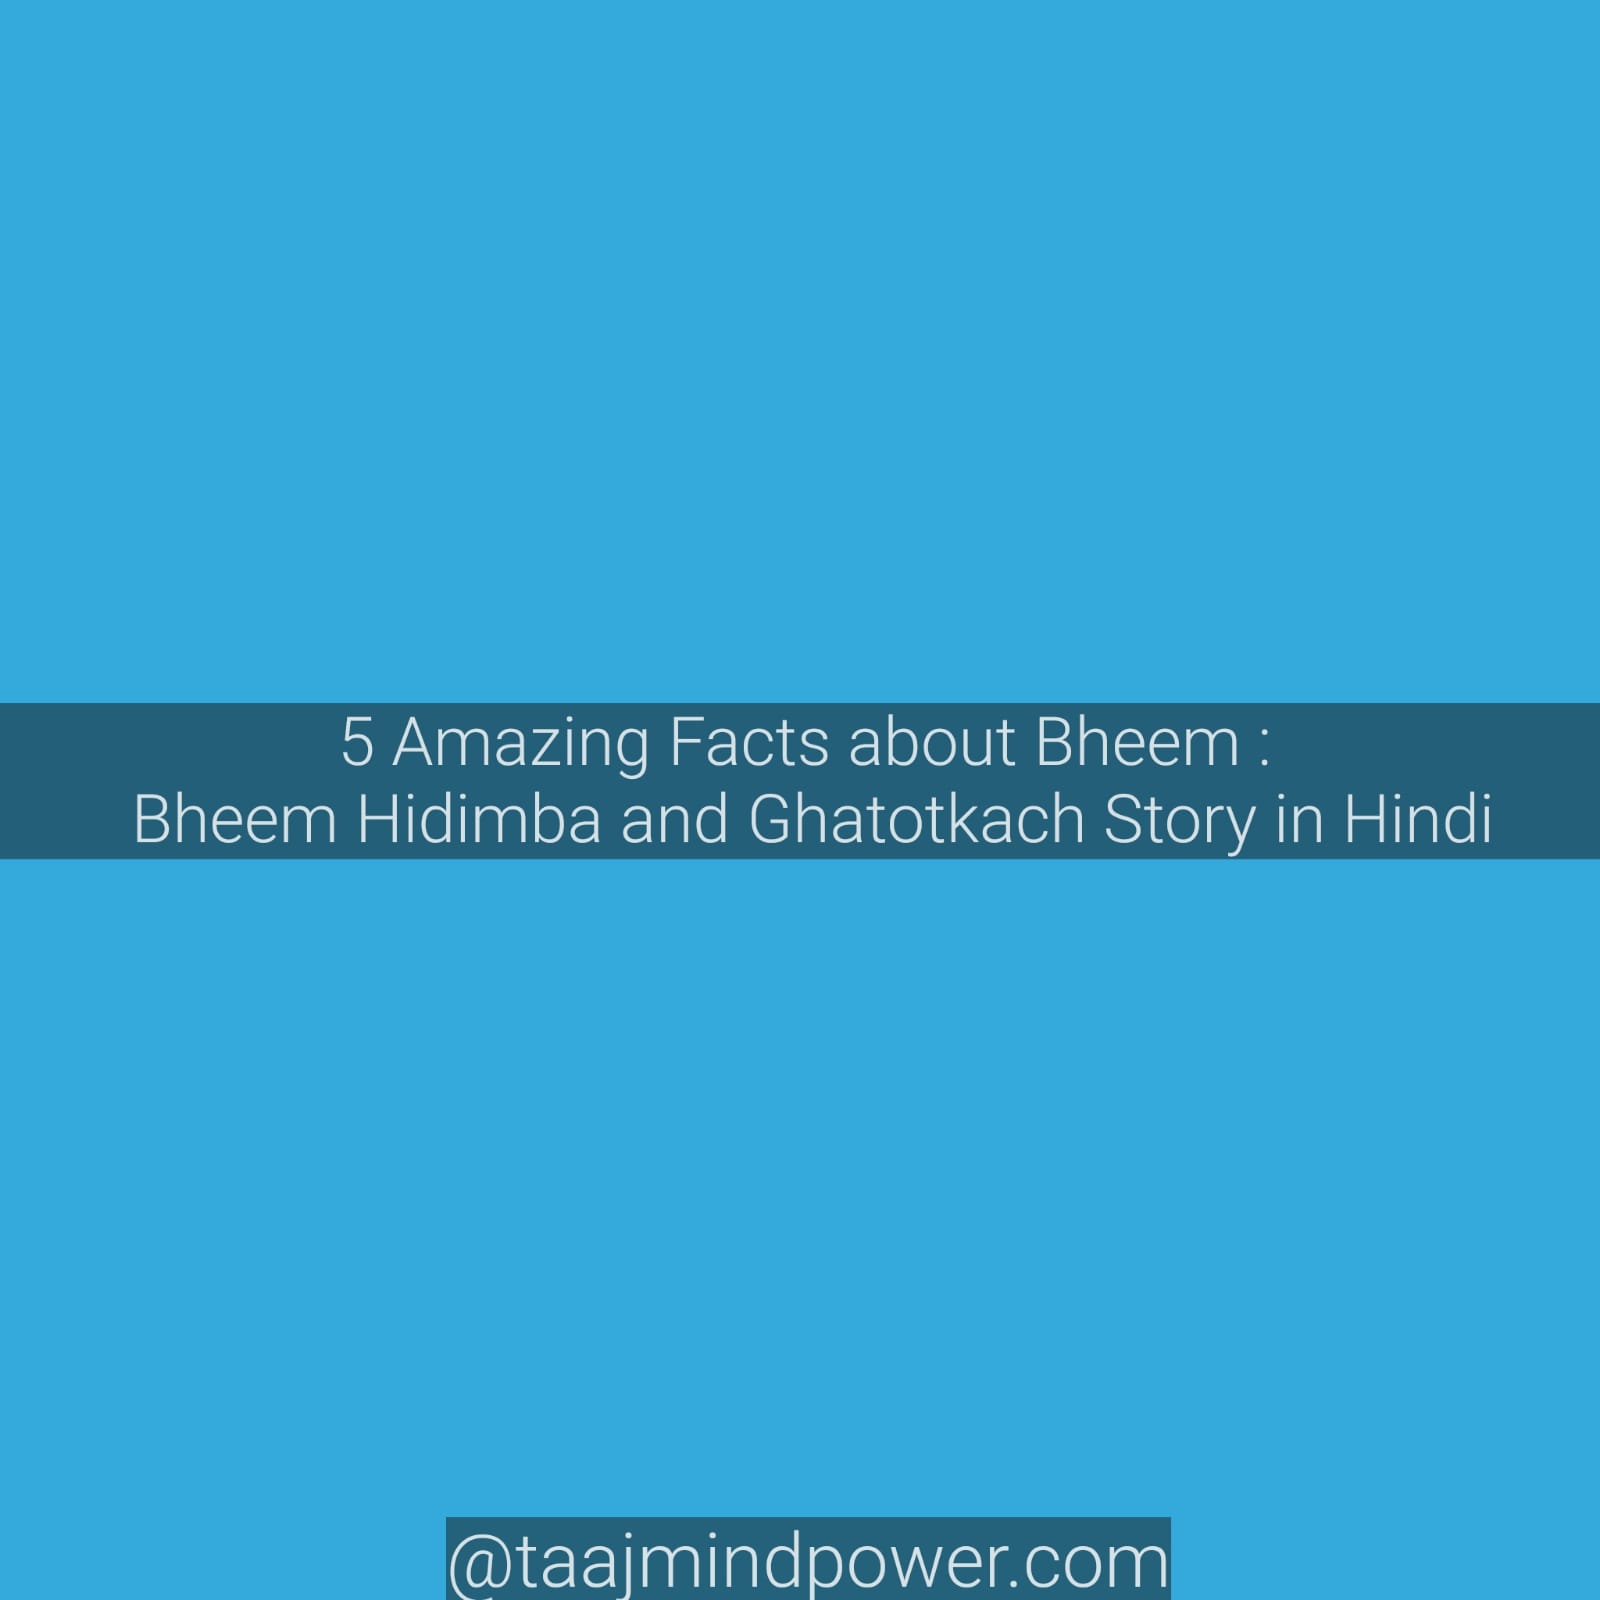 5 Amazing Facts about Bheem